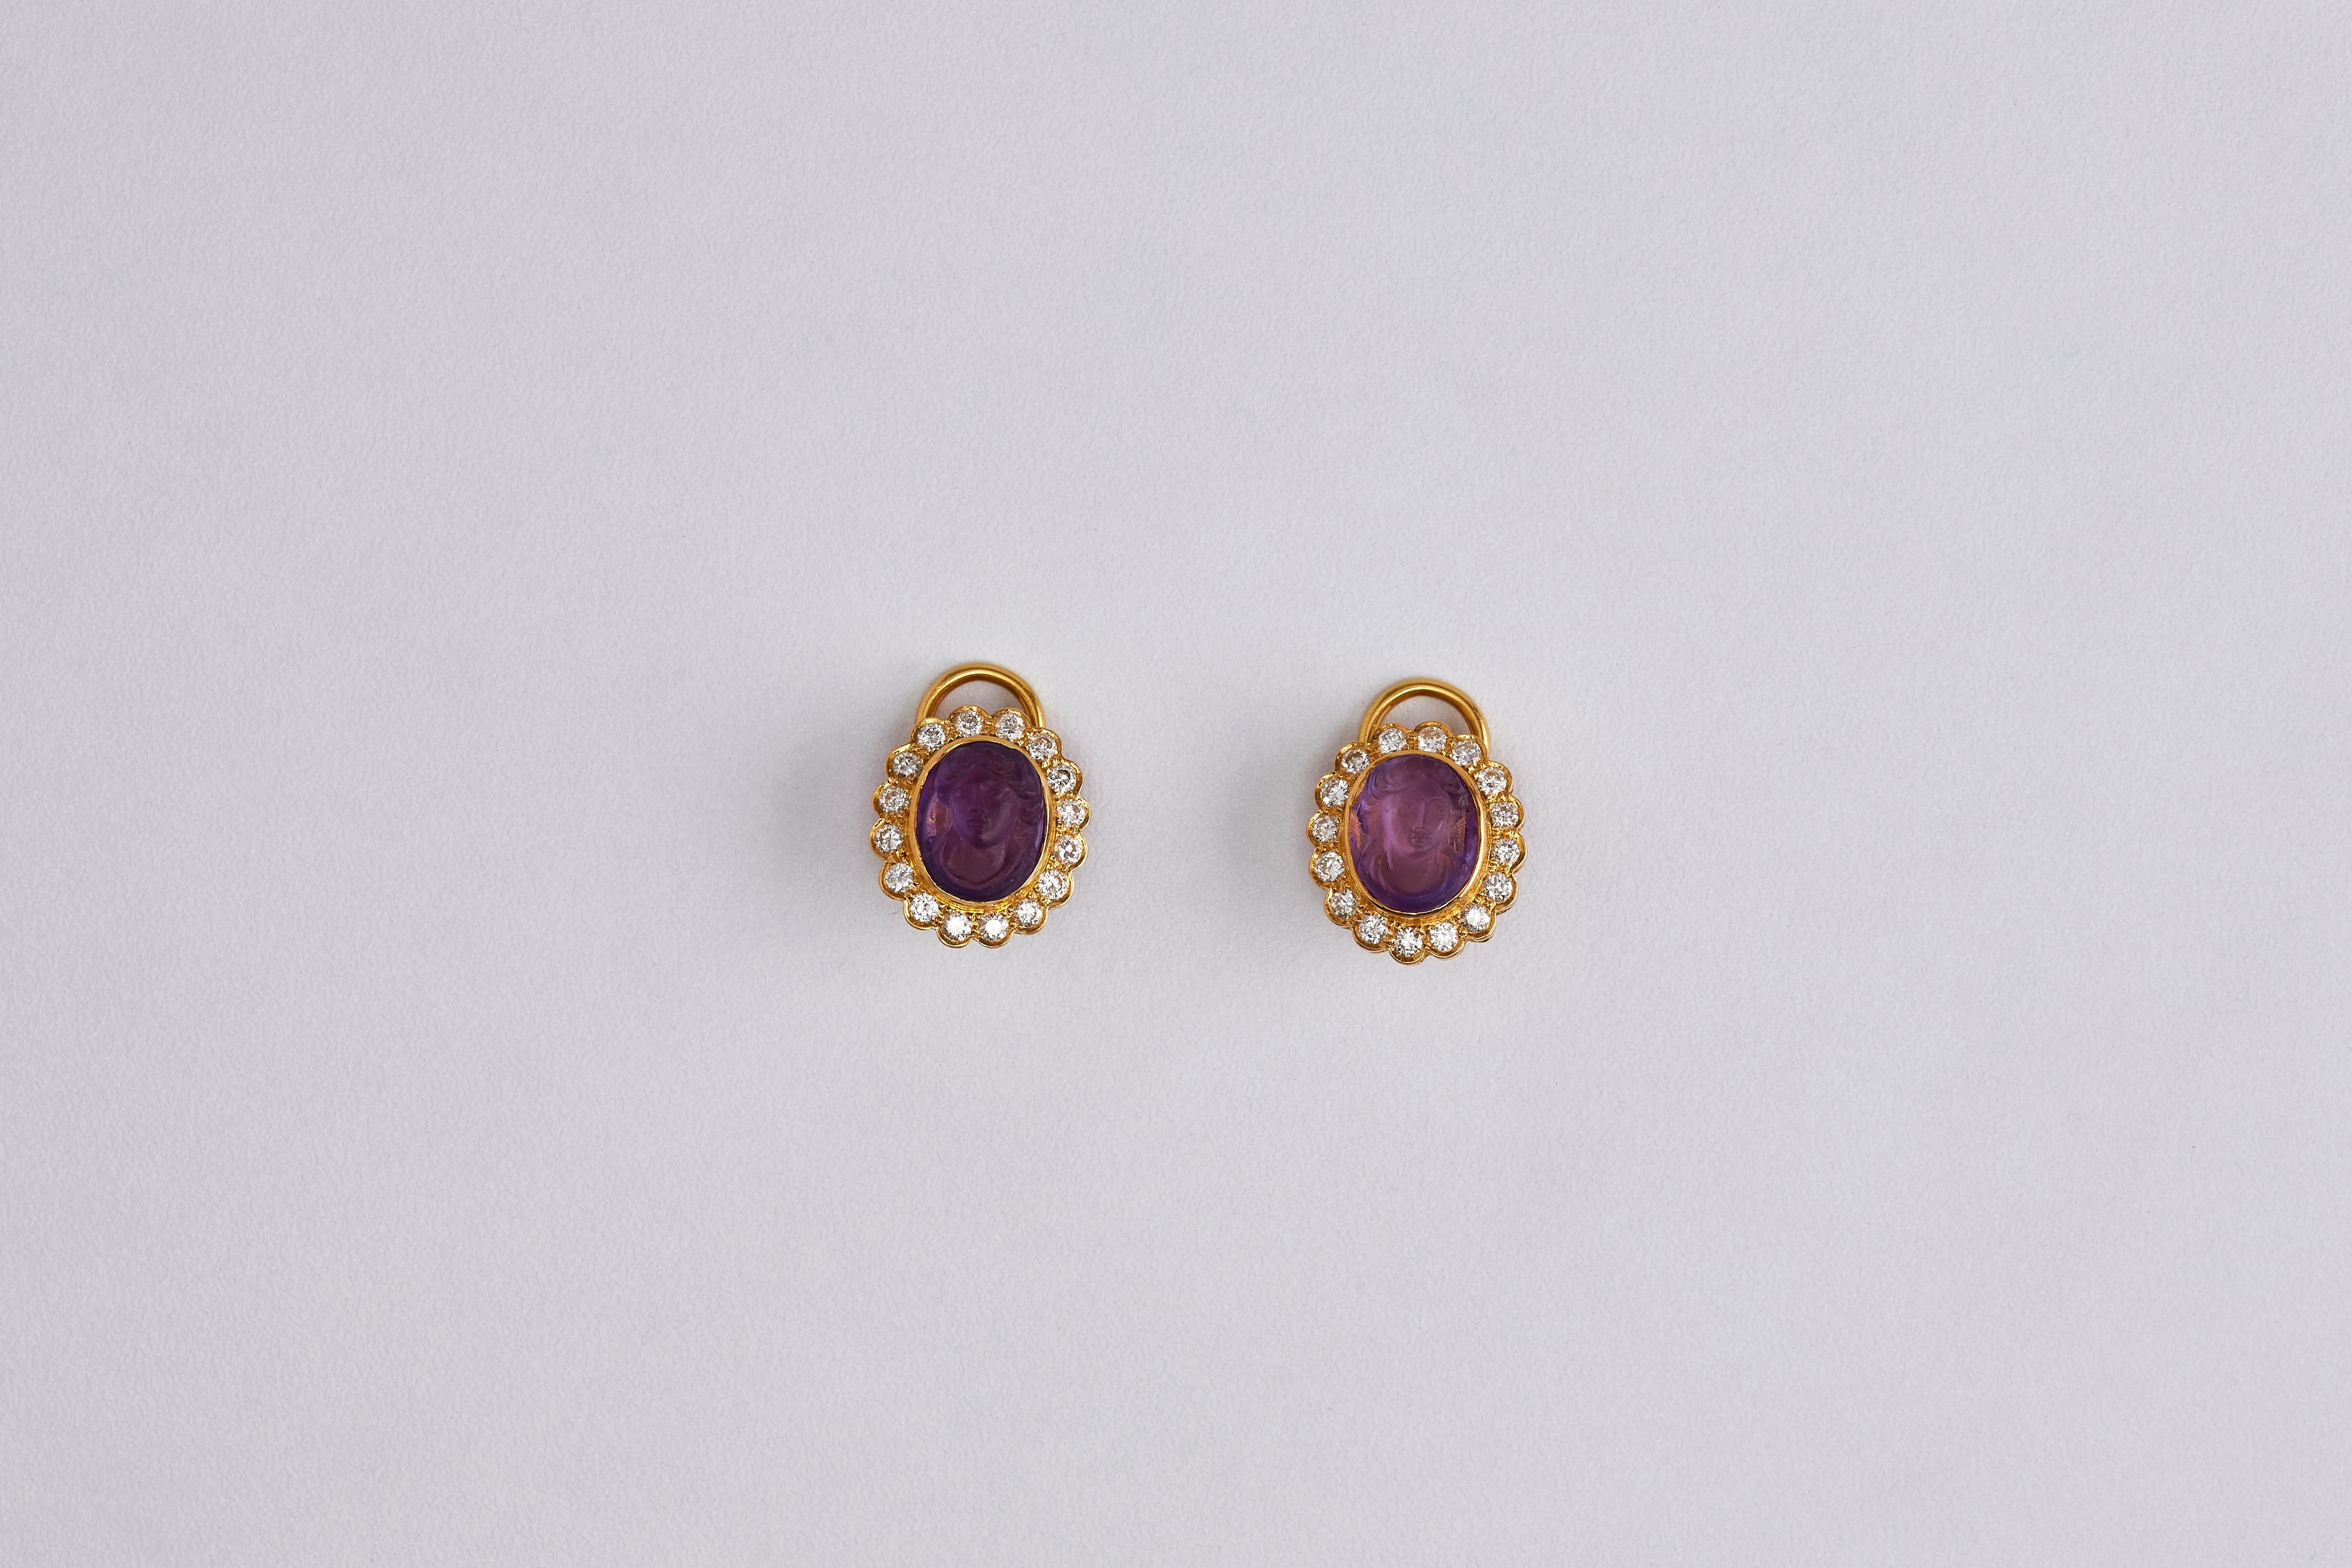 Oval Cut Pair of 18k Yellow Gold Diamond and Amethyst Earrings For Sale